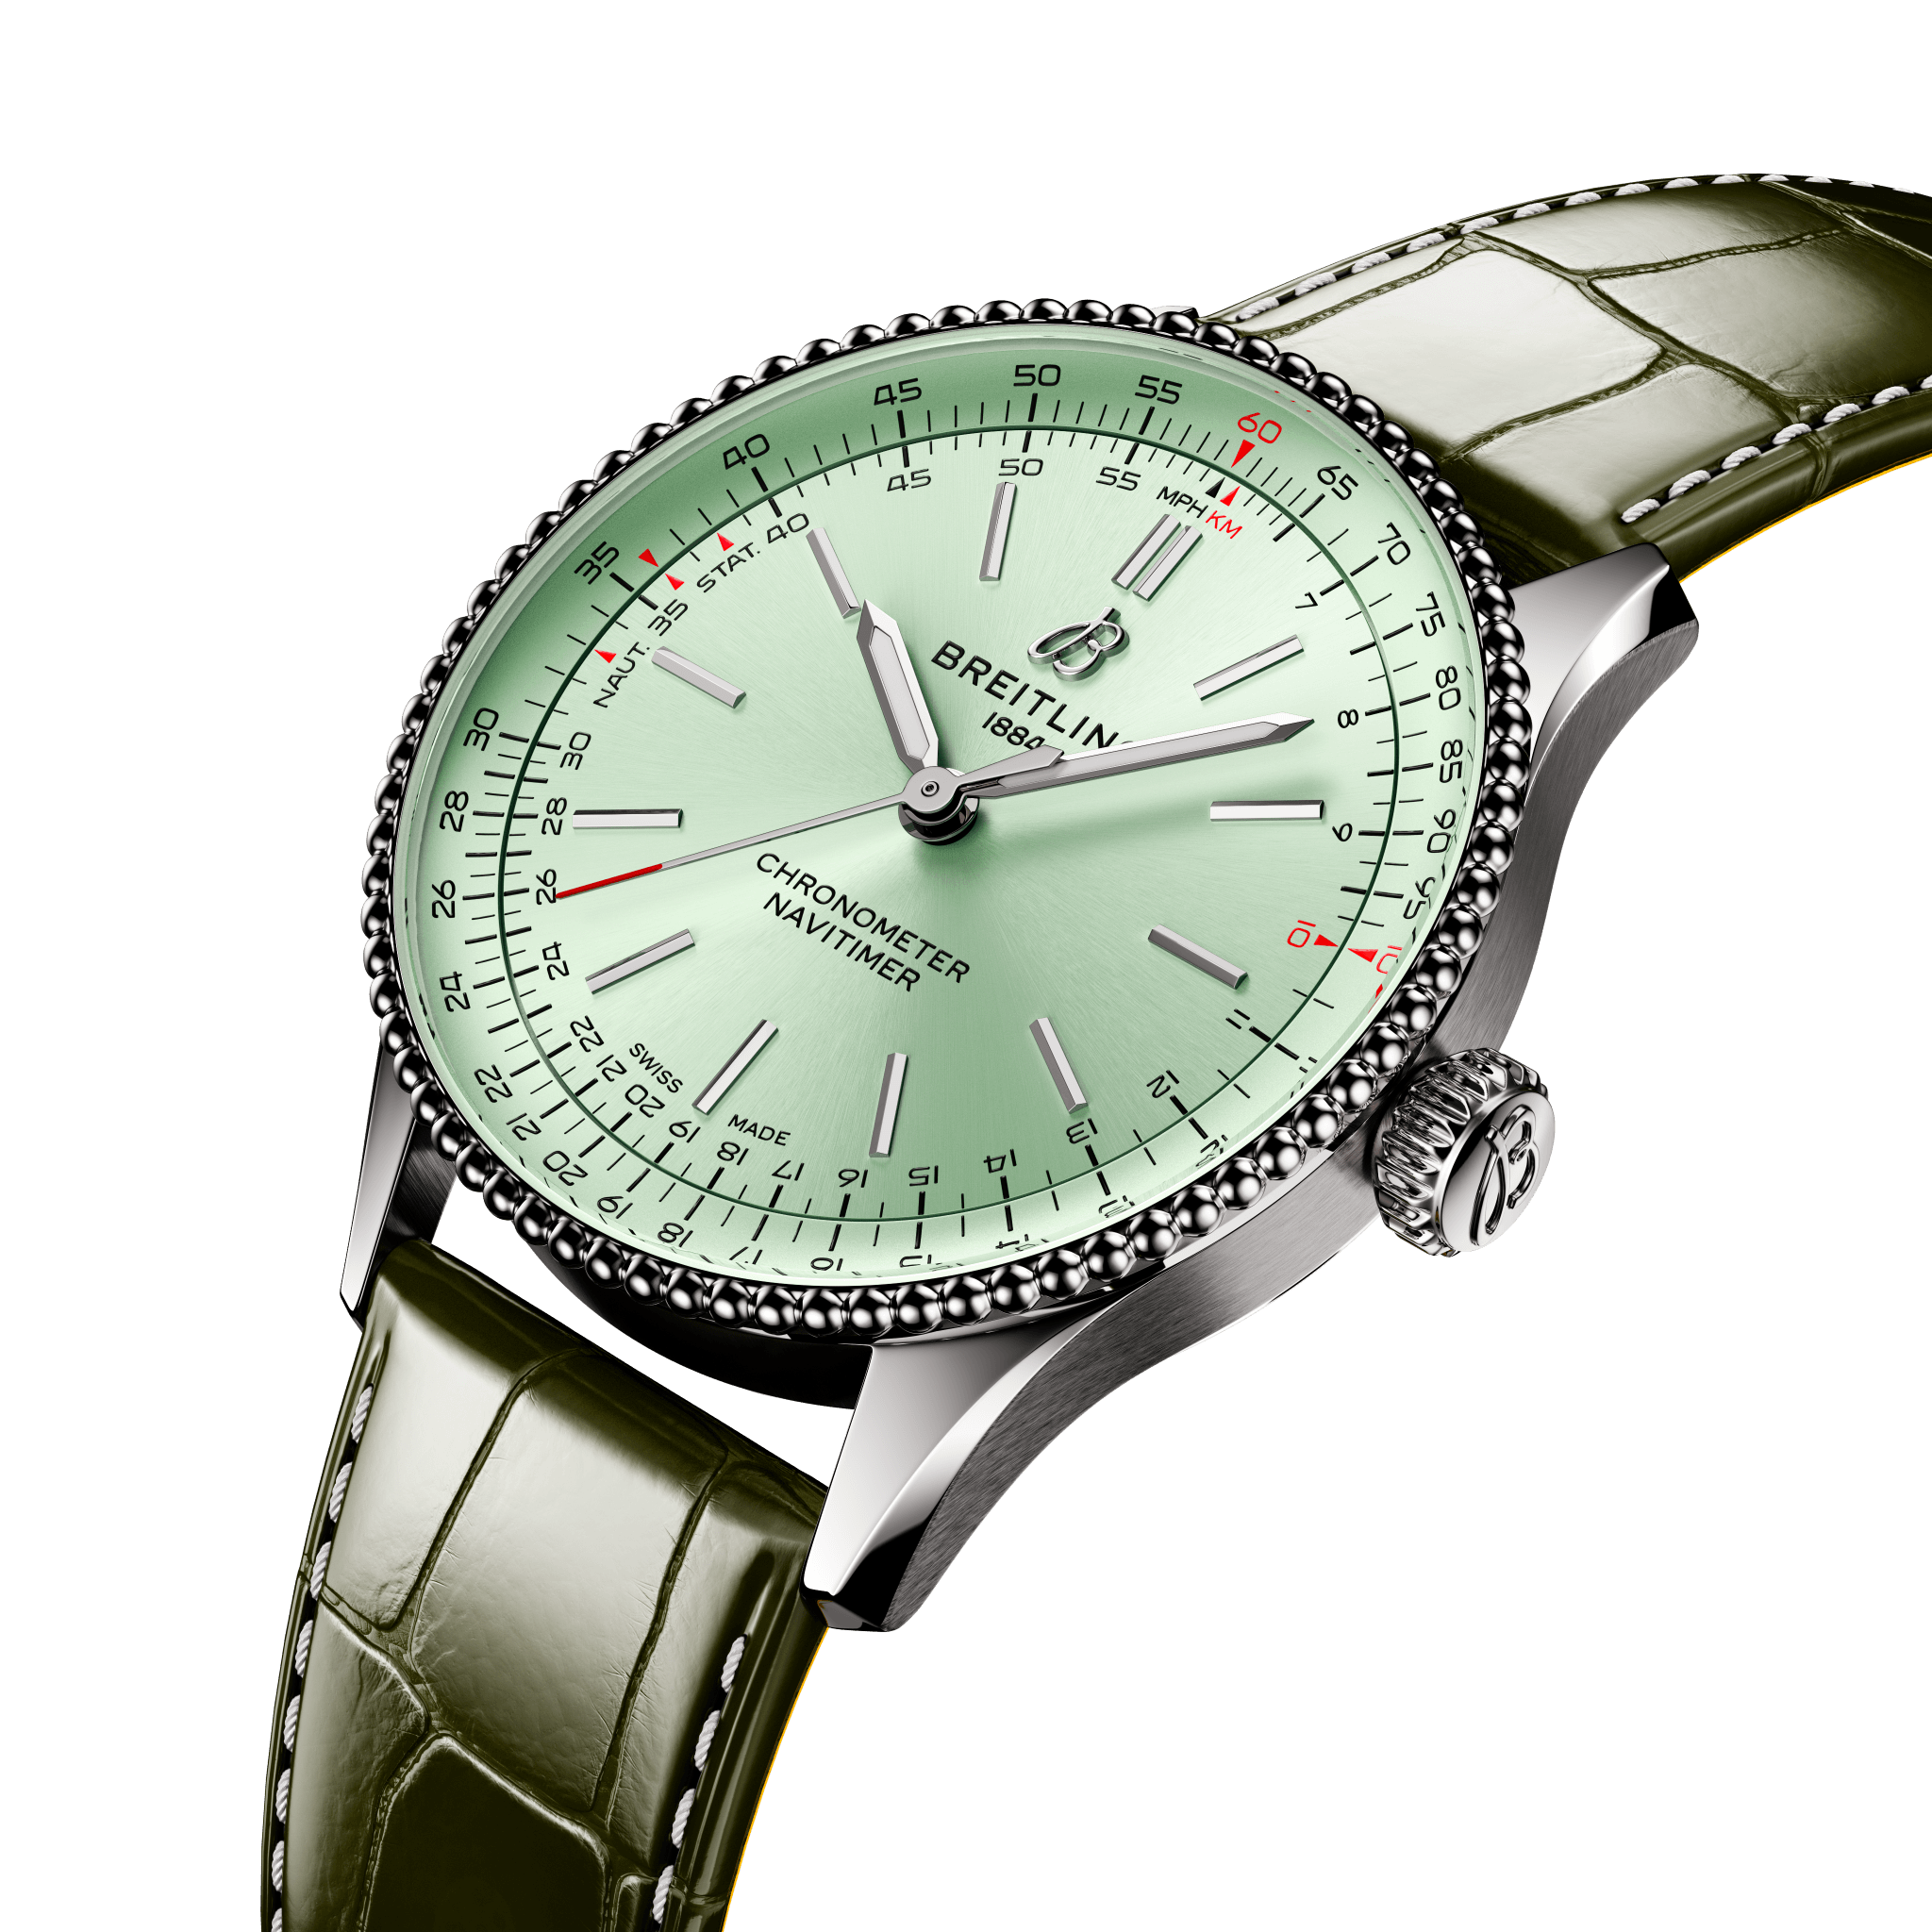 BREITLING NAVITIMER AUTOMATIC 36 AUTOMATICO 36 MM ACERO INOXIDABLE VERDE